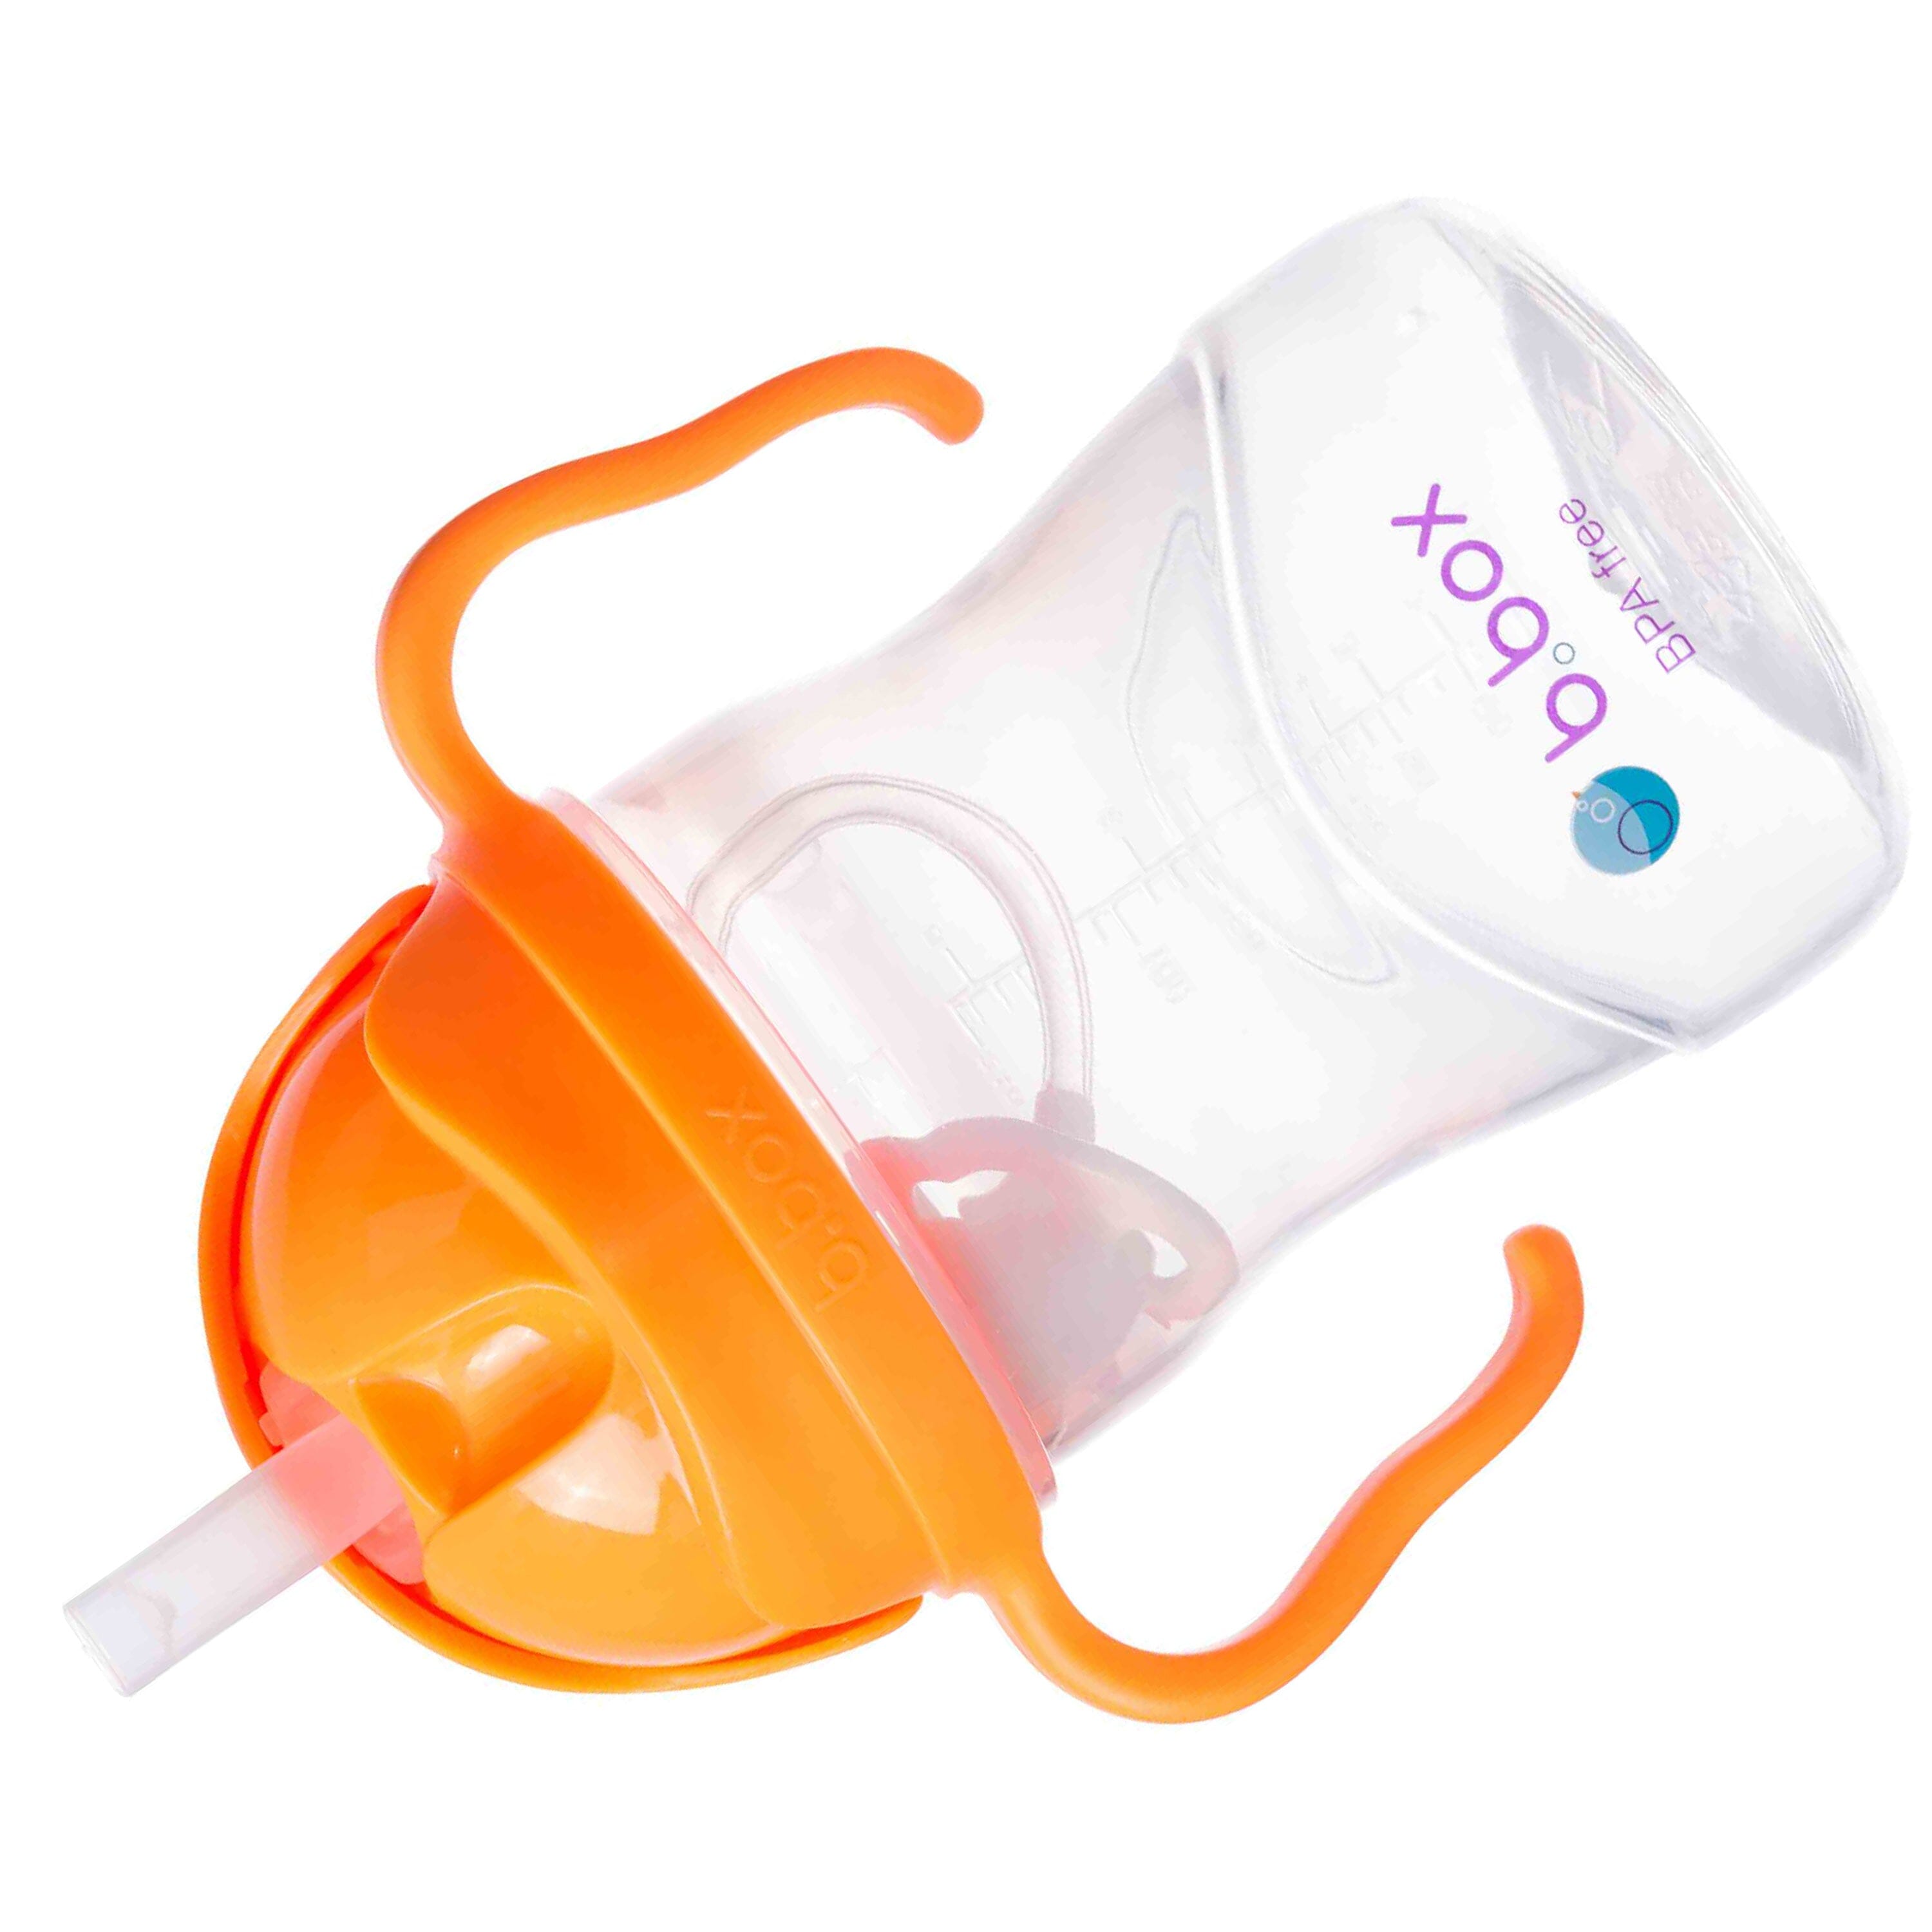 B.BOX - Sippy Cup V2 - Neon Orange Zing Meal Time B.BOX